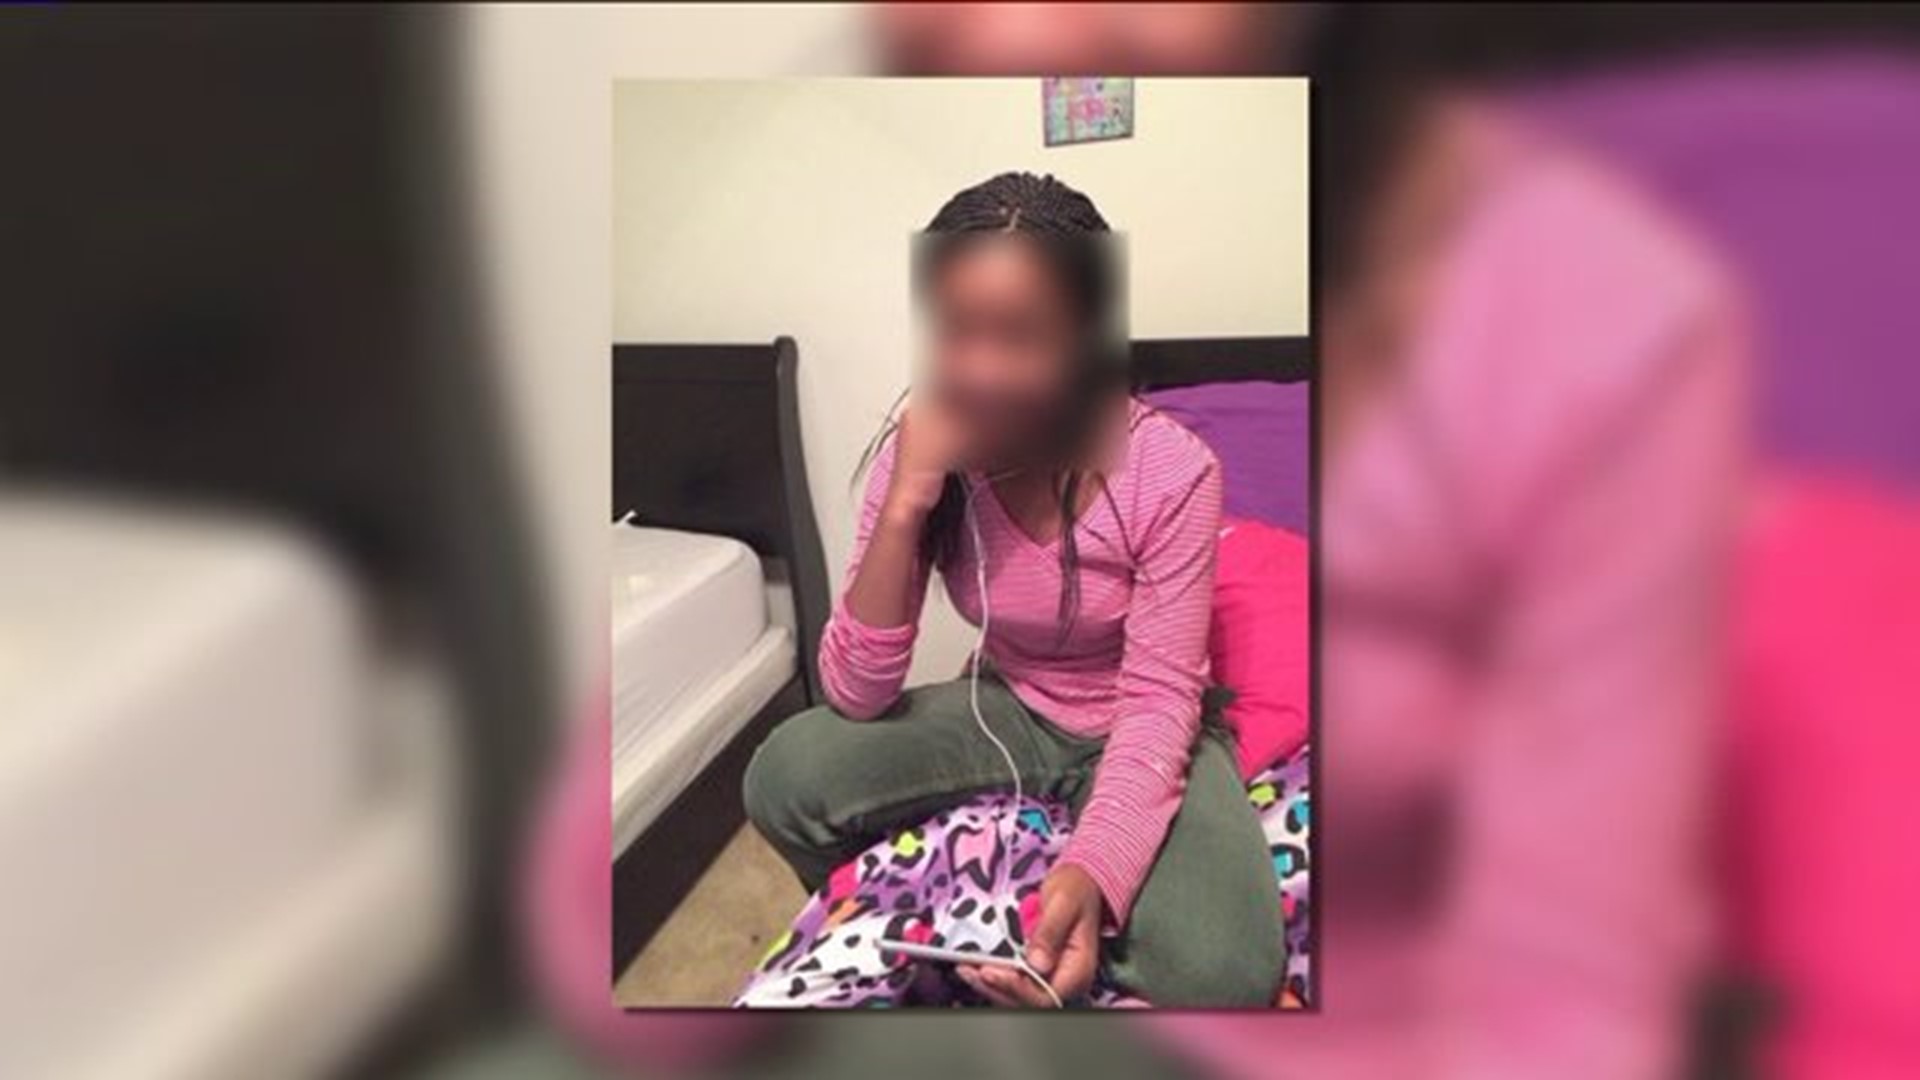 10-year-old girl handcuffed while father was arrested in Middletown